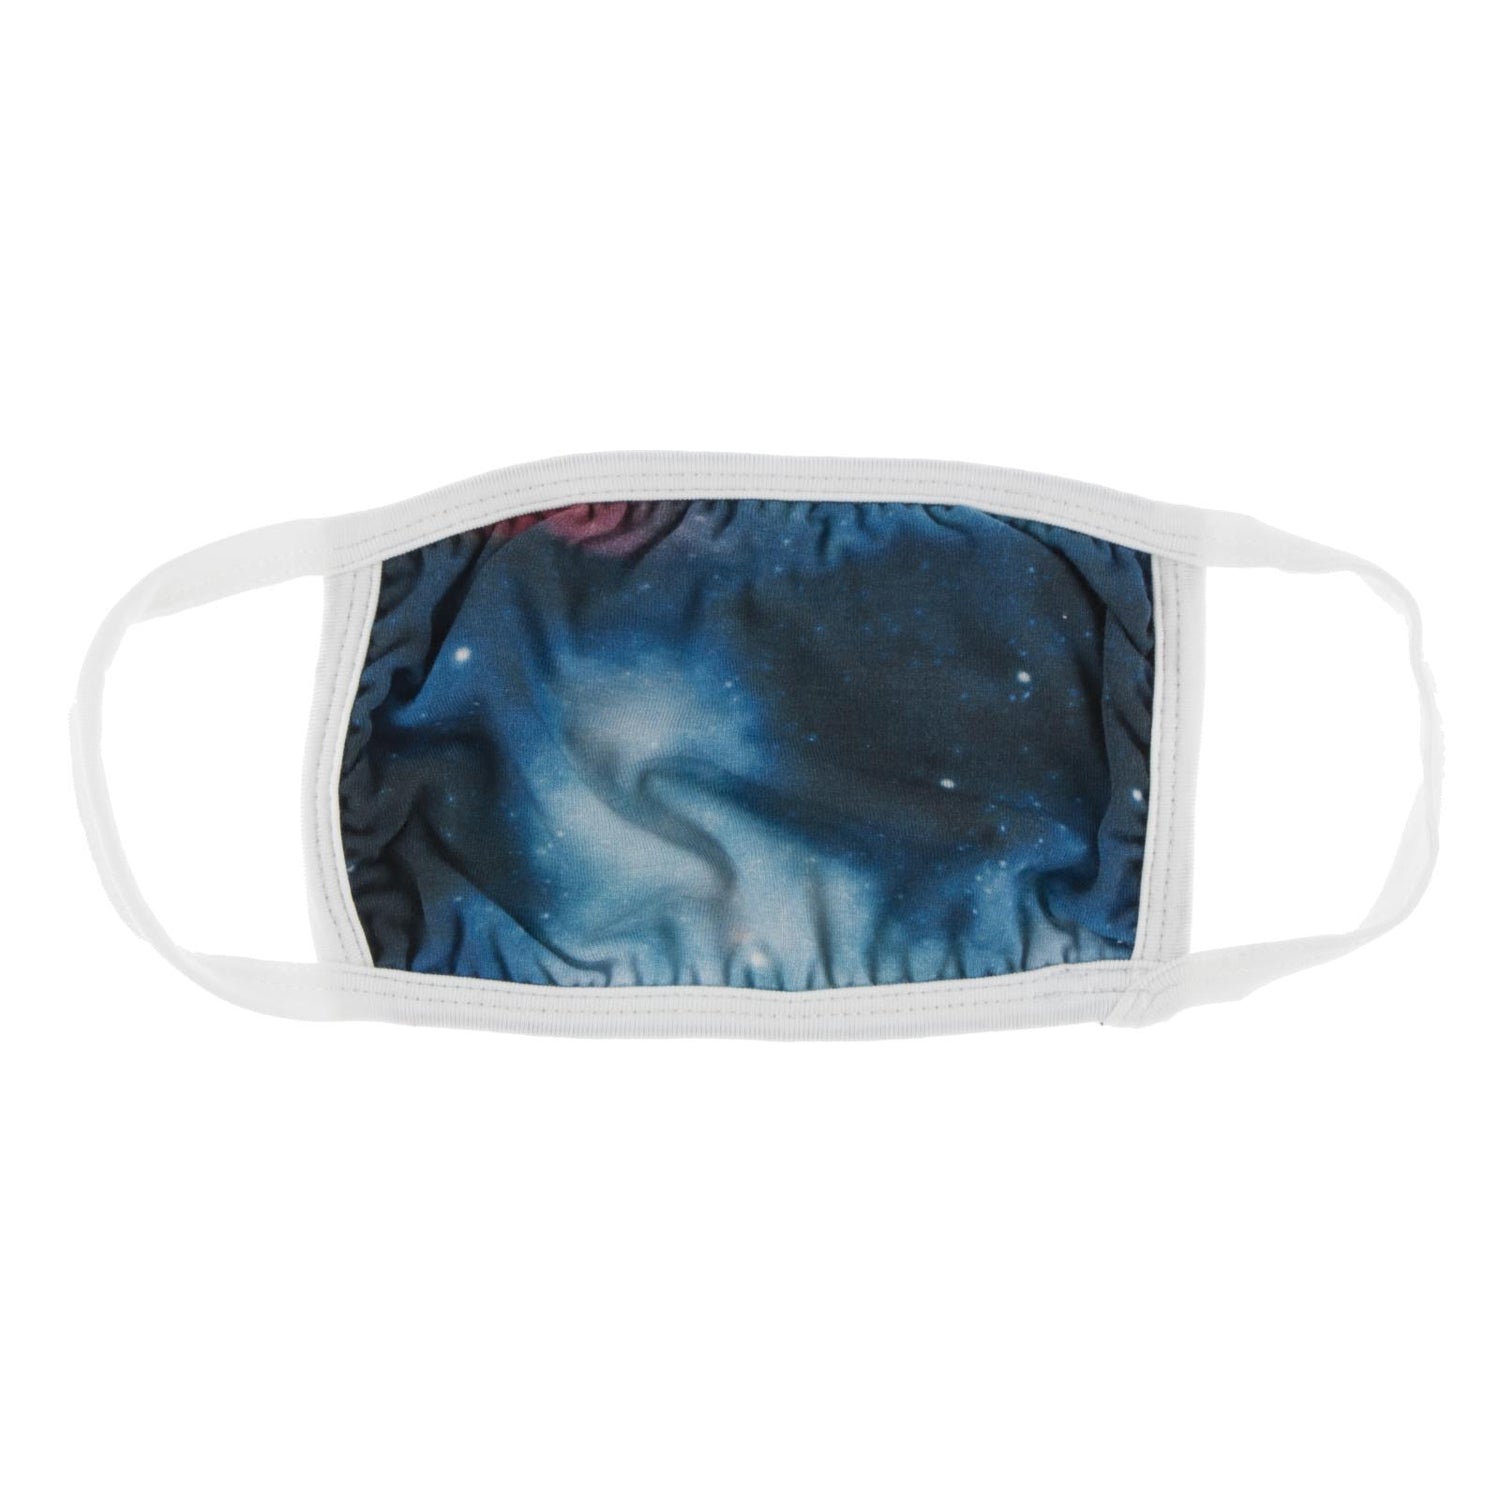 Print Child Mask in Red Ginger Galaxy